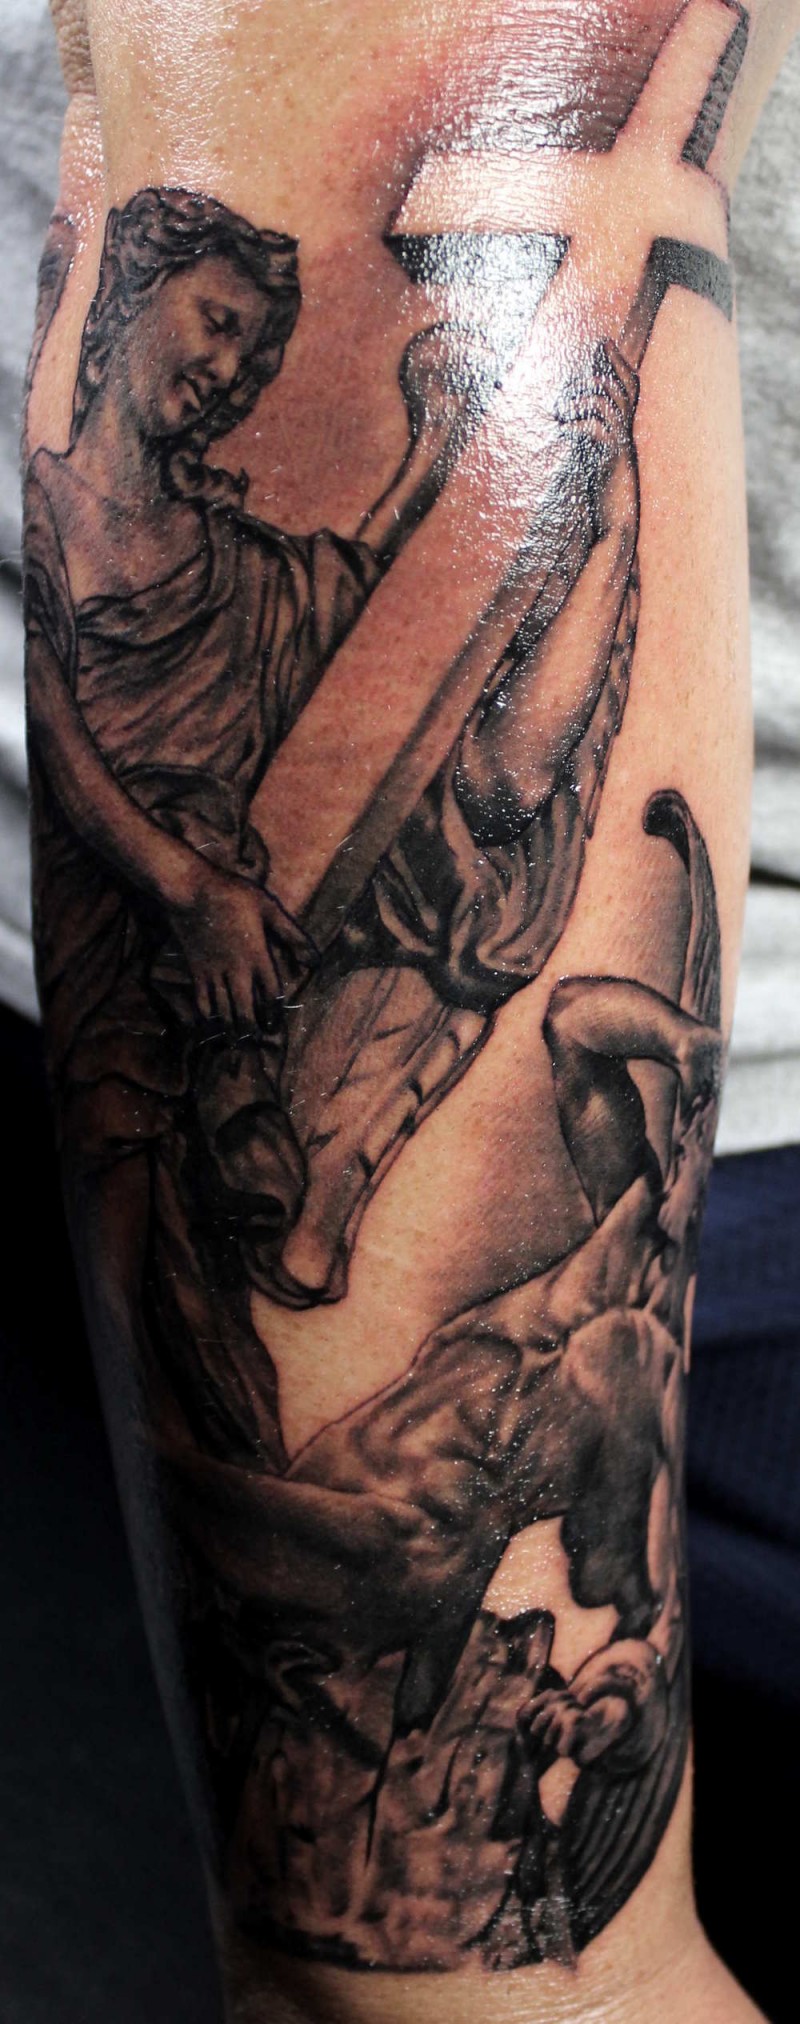 Dramatic religious themed black ink forearm tattoo on angels with cross